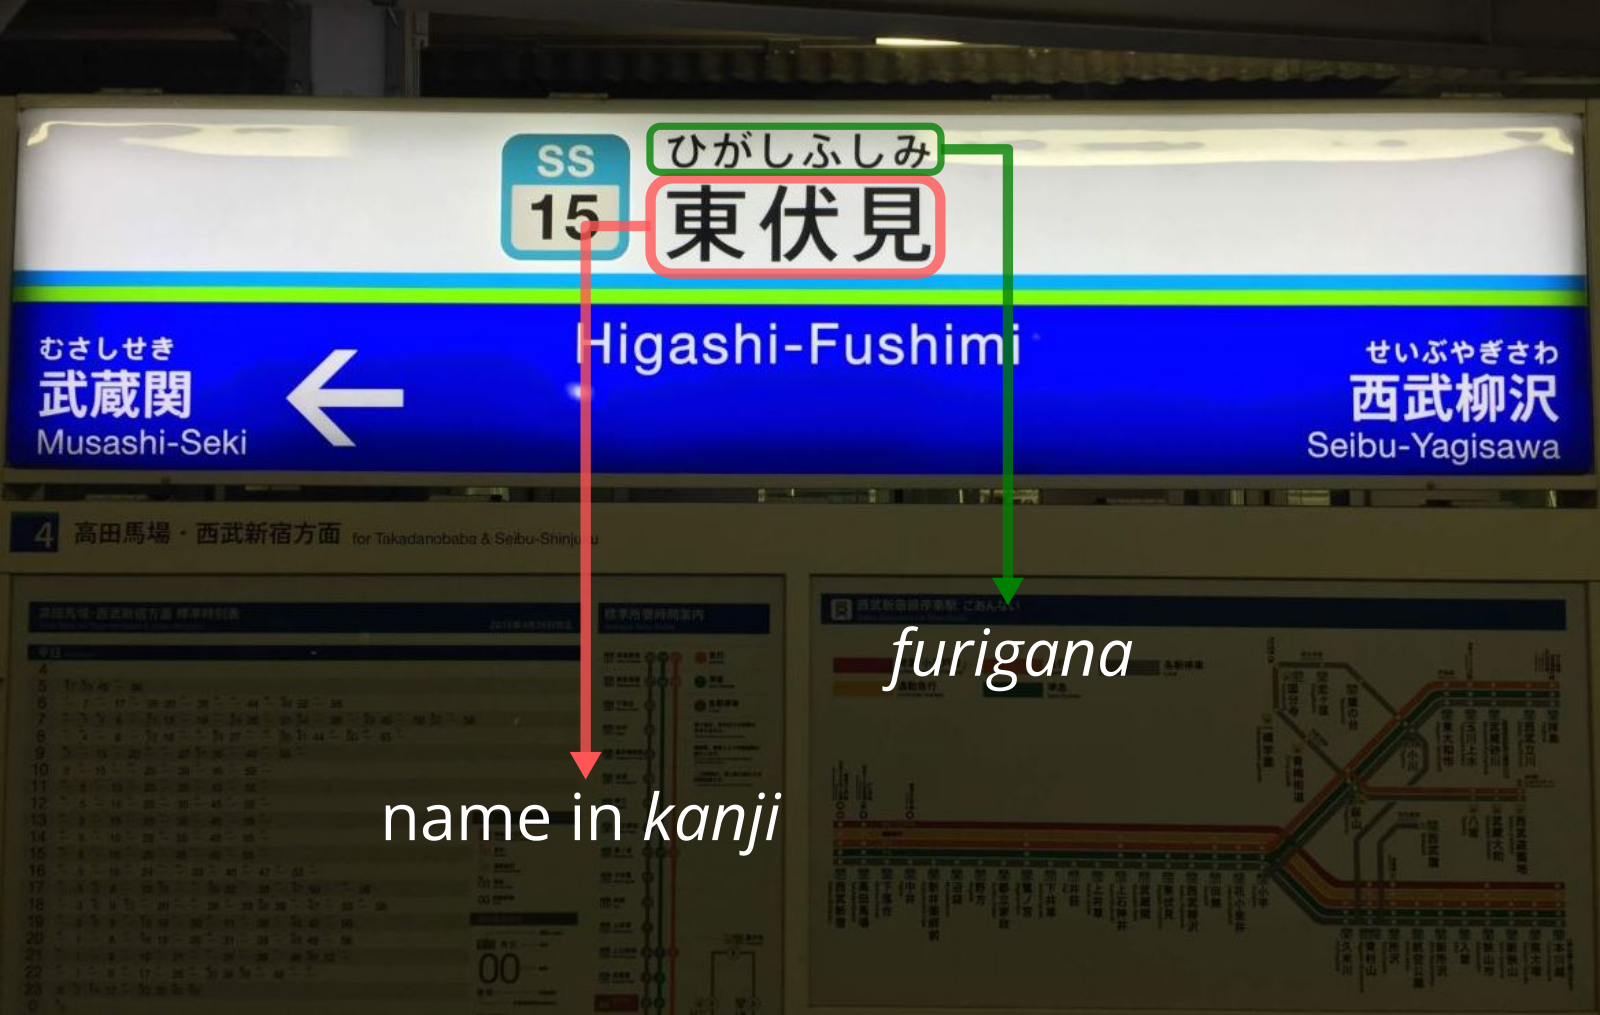 A sign in a train station. It's often impossible to guess the pronunciation of place names, hence the furigana above the official kanji name. Source: Wikipedia.